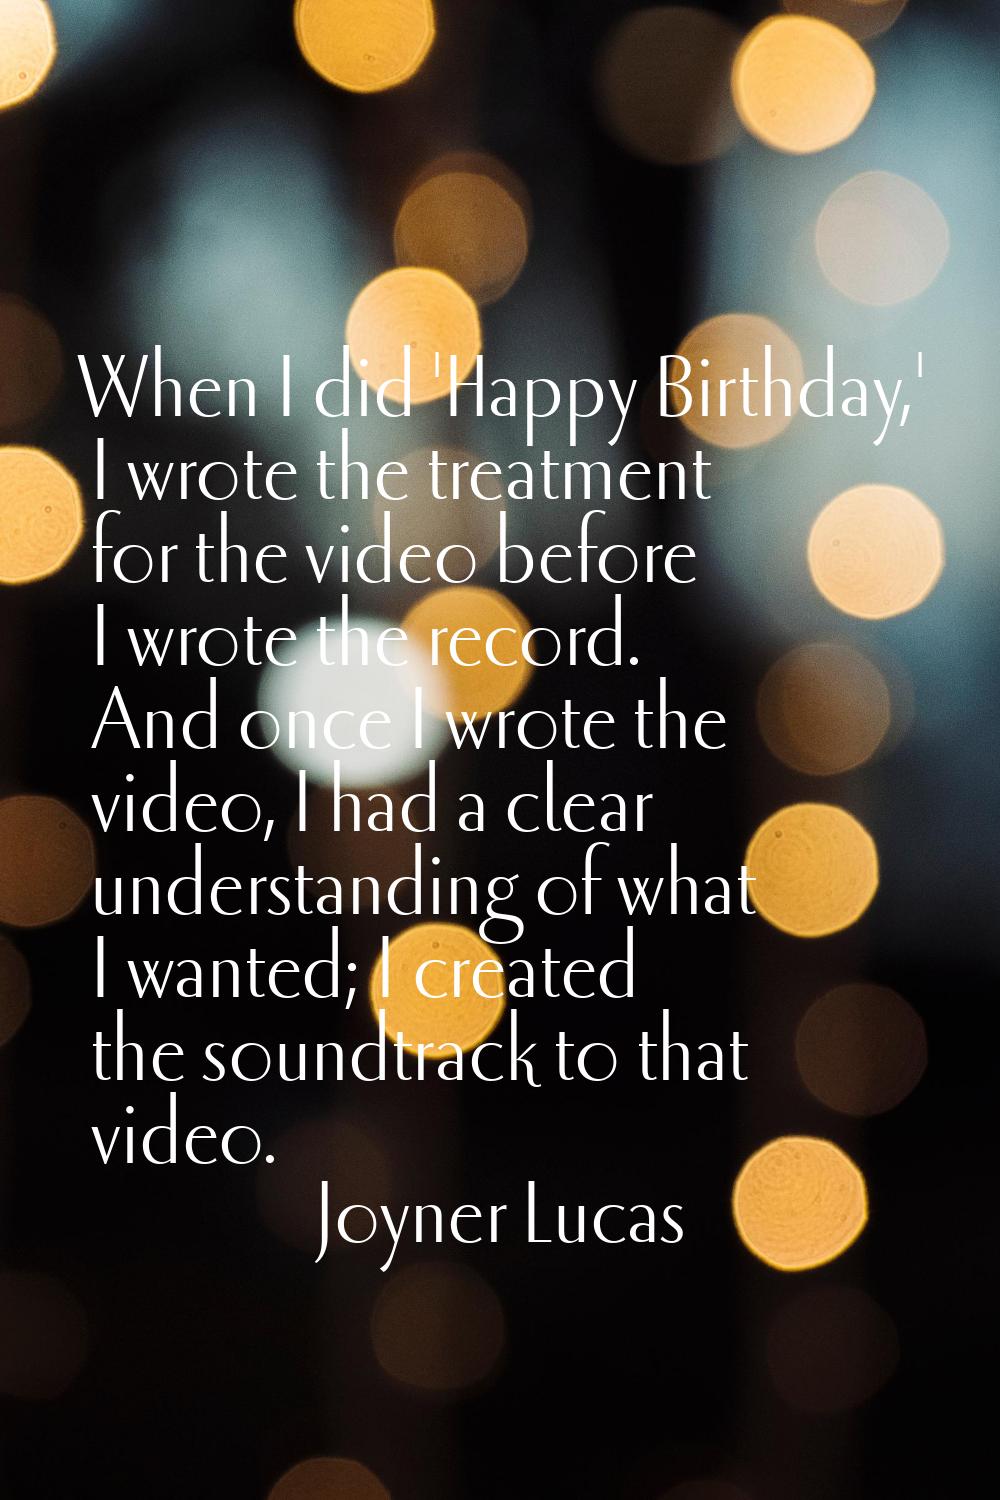 When I did 'Happy Birthday,' I wrote the treatment for the video before I wrote the record. And onc